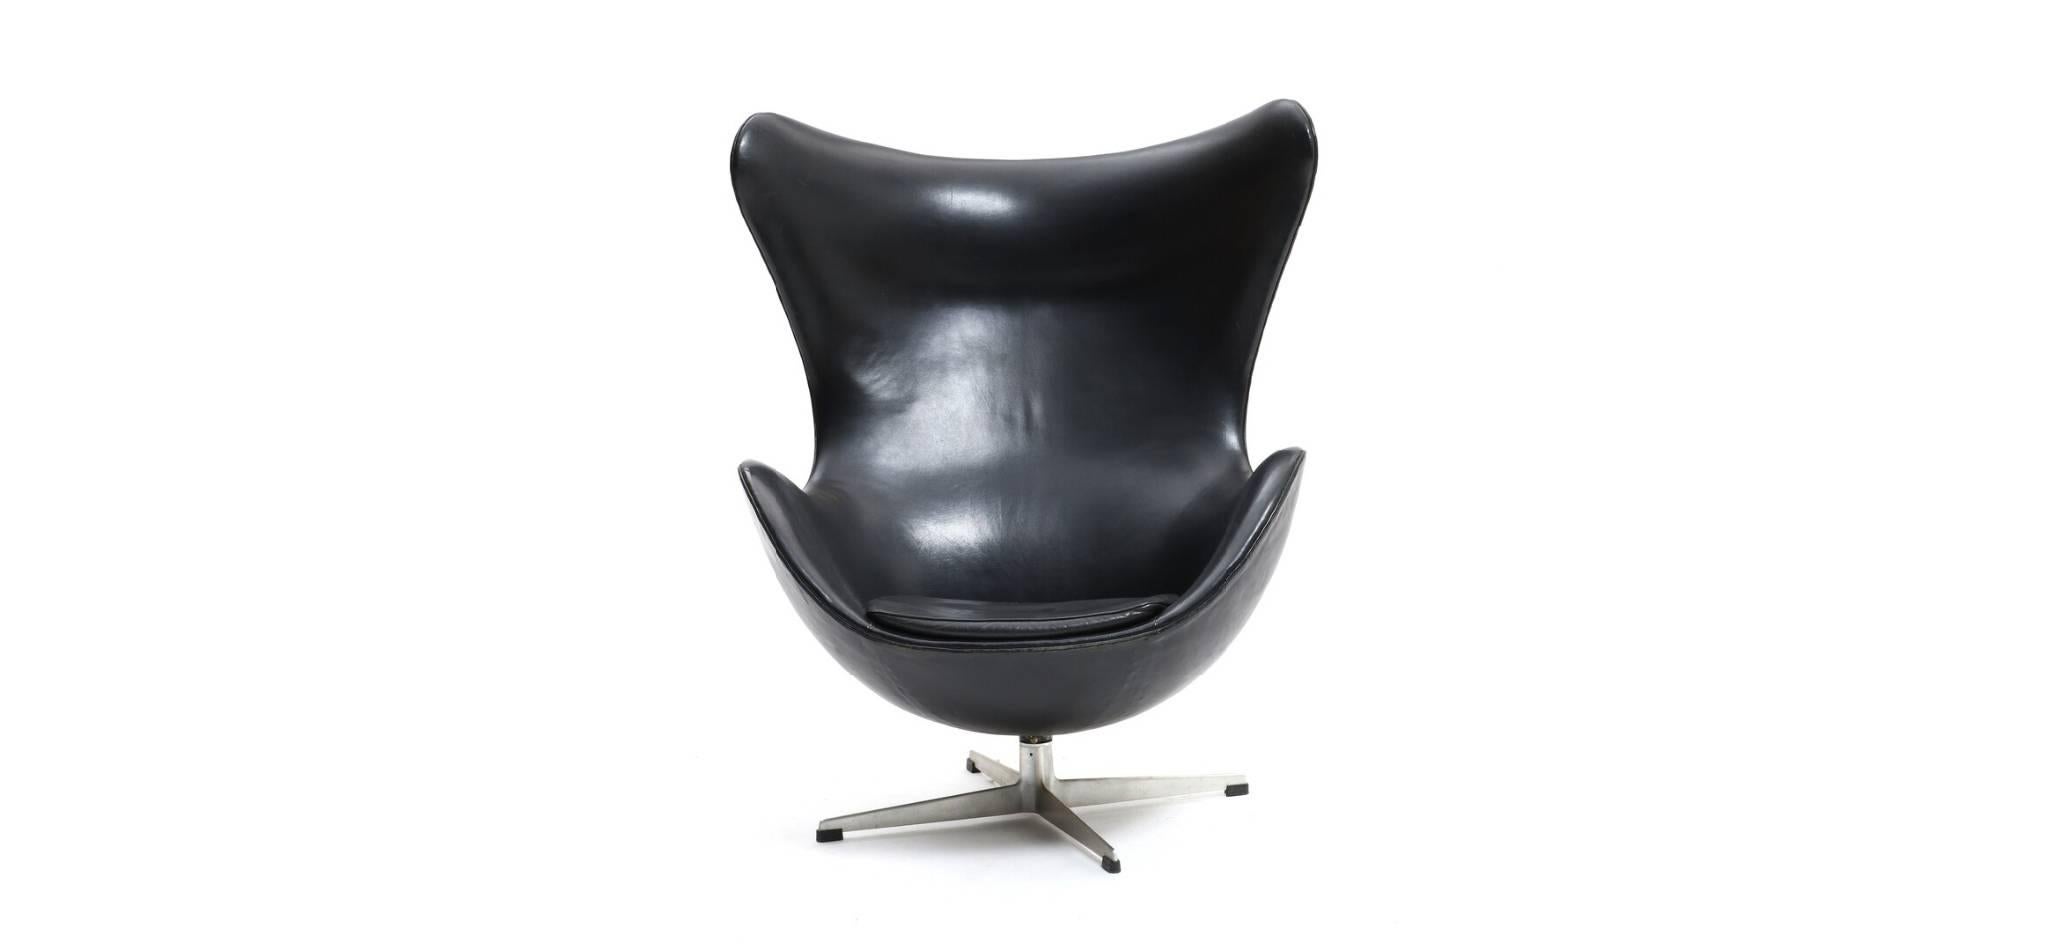 Arne Jacobsen: “The Egg Chair”. Manufactured by Fritz Hansen.
Easy chair with profiled aluminium base and stem, shell and loose cushion upholstered with black patinated leather. Model 3317. Designed 1958. Manufactured and marked with label by Fritz